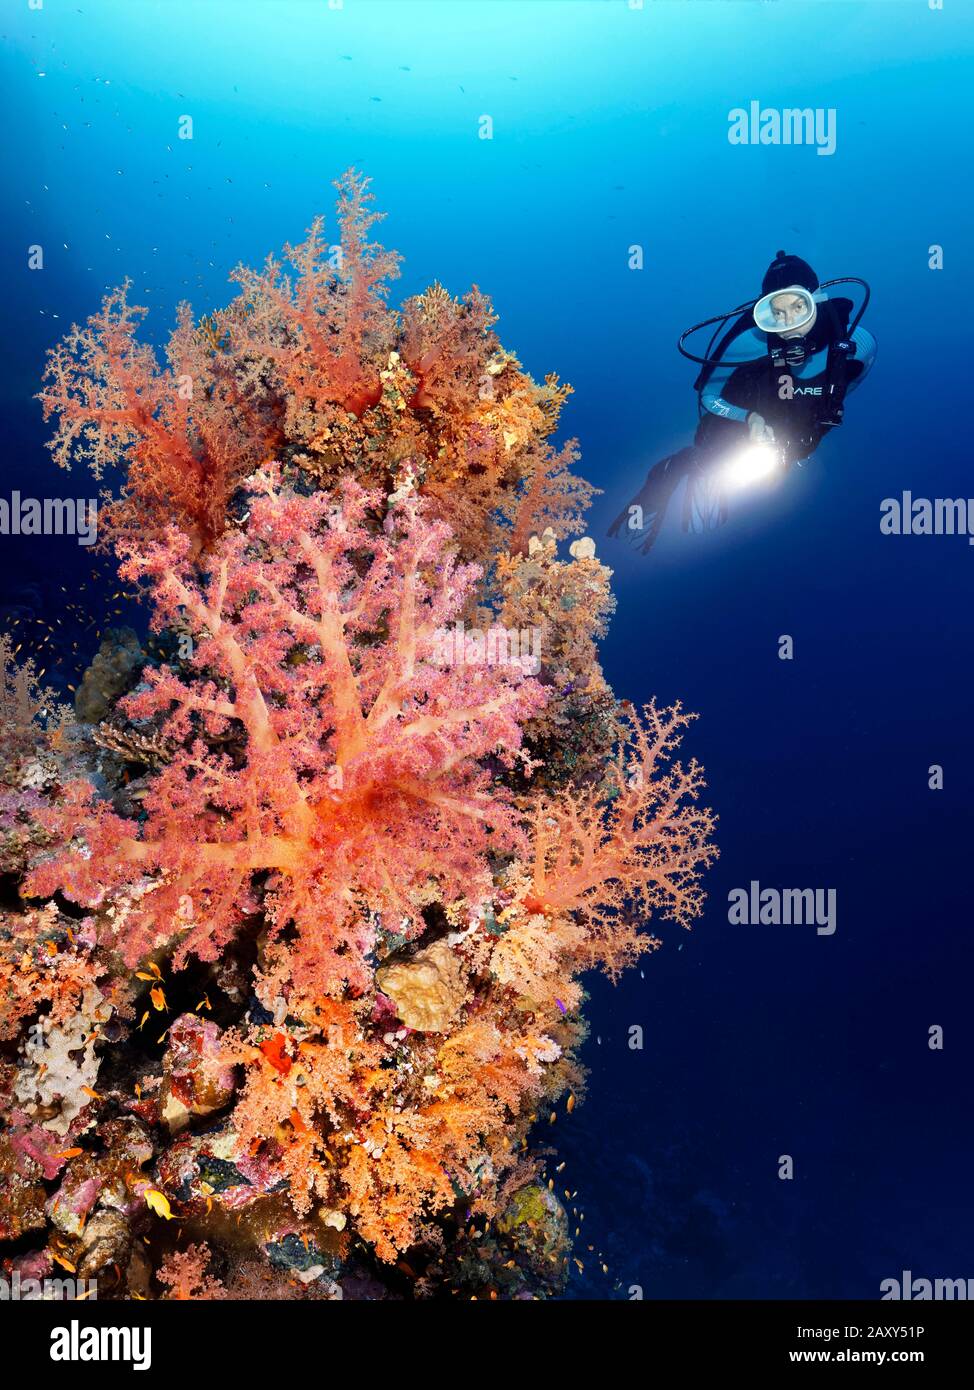 Diver with lamp viewing coral reef densely covered with different stony corals (Scleractinia) and Soft corals (Alcyonacea), Strait of Tiran, Sinai Stock Photo